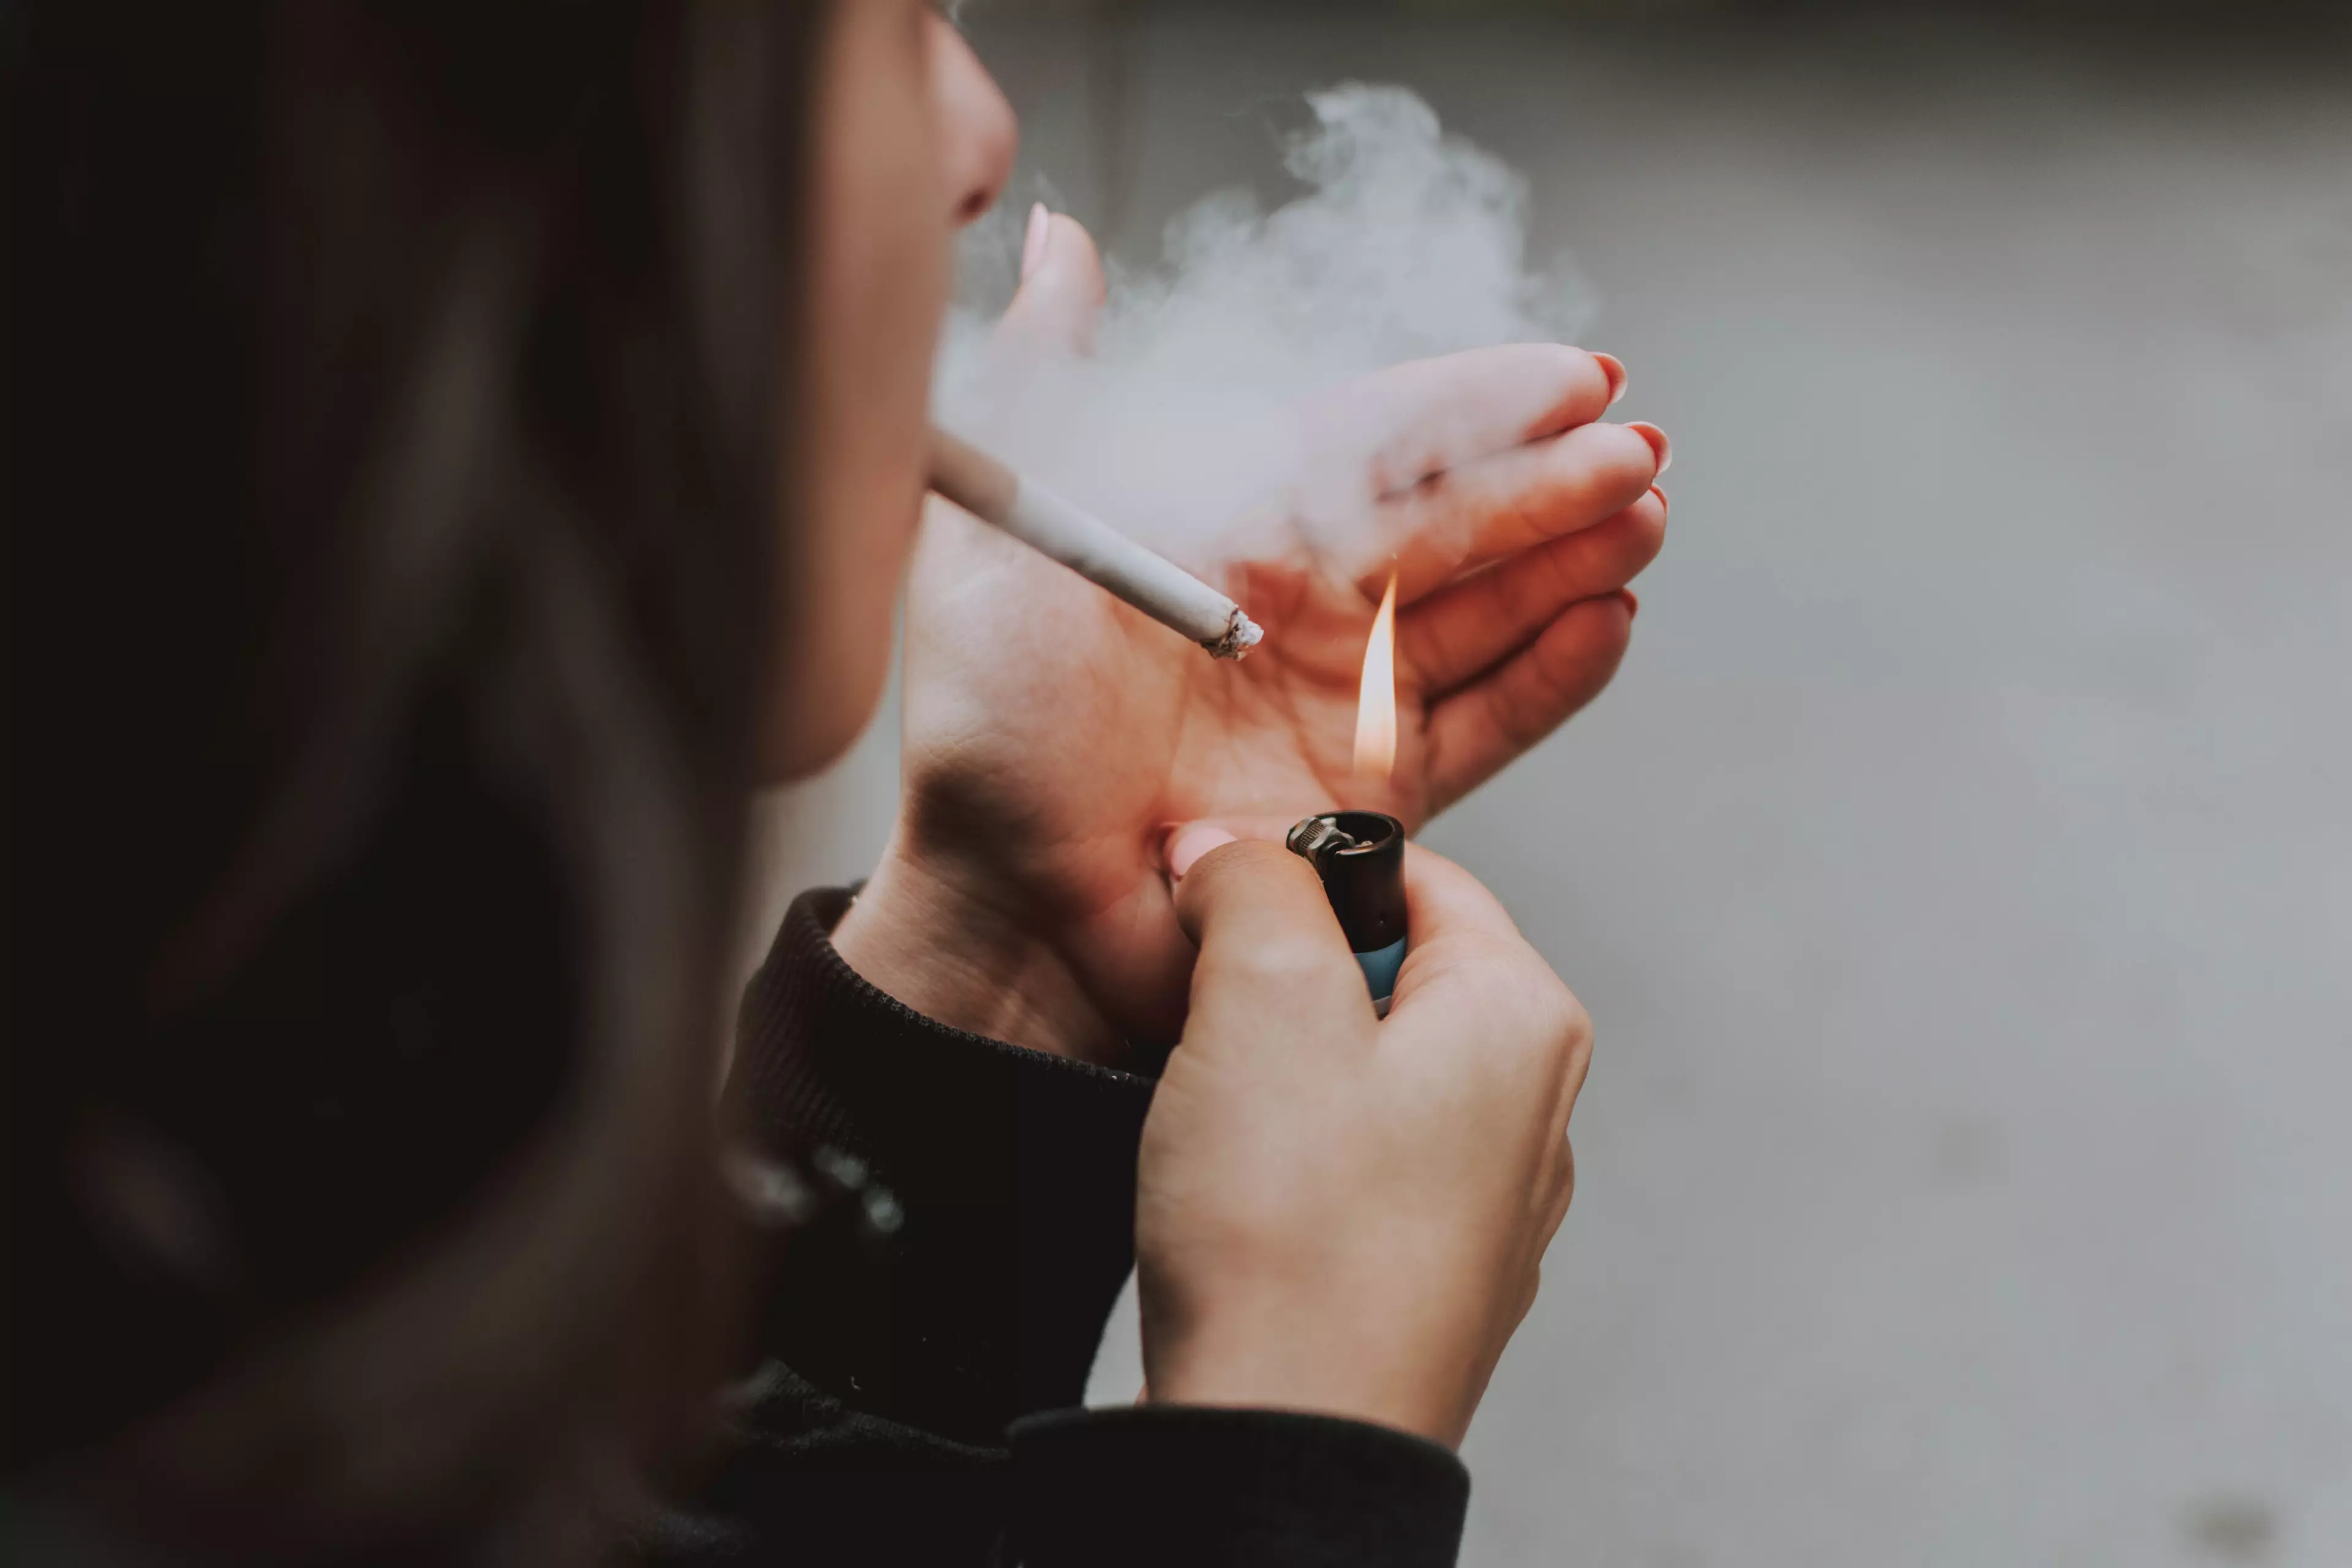 The new law hope to stop young people from taking up smoking (